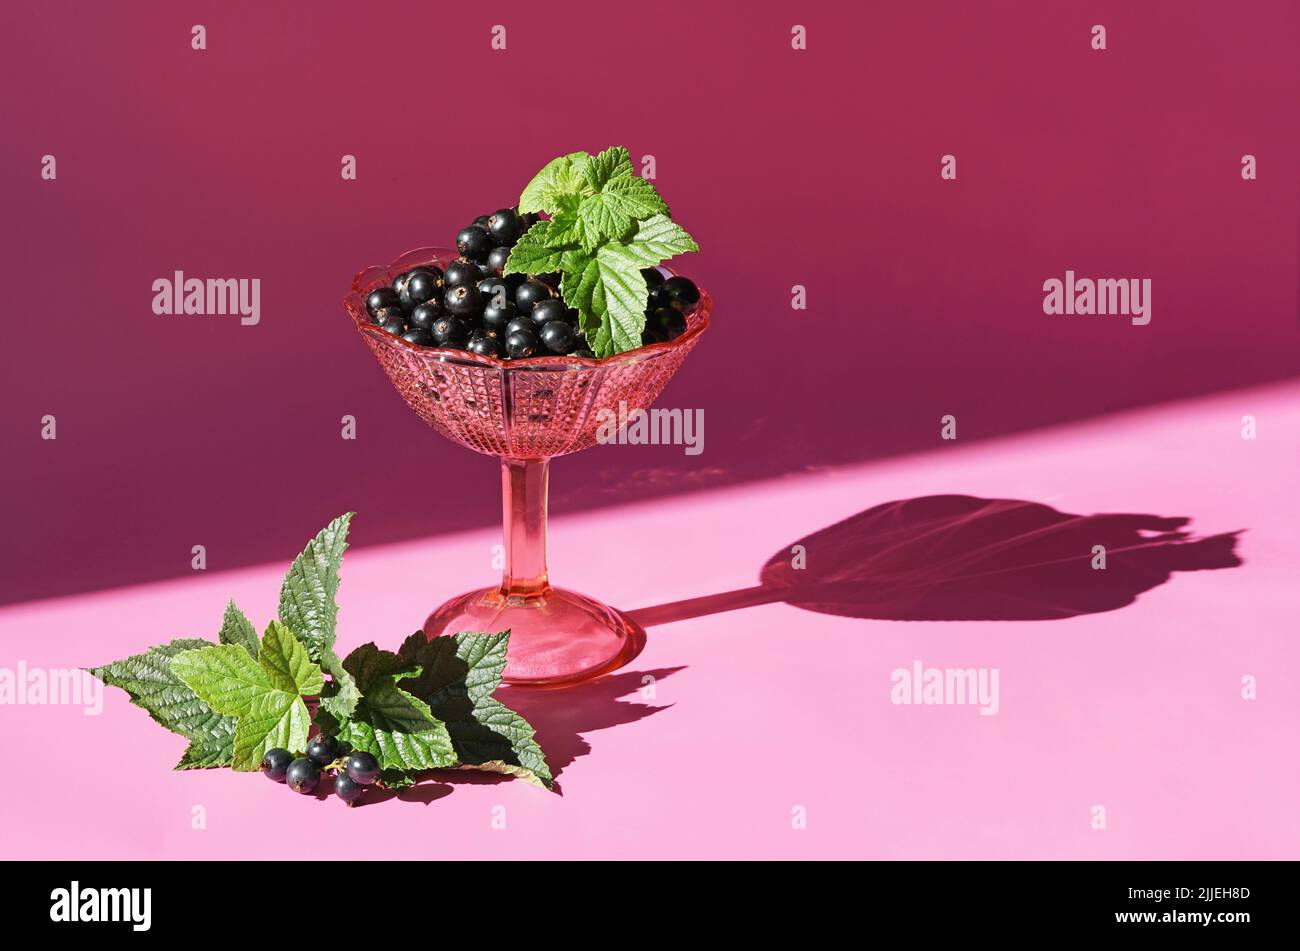 Fresh black currant in a glass pink cup. Hard light, pink background Stock Photo